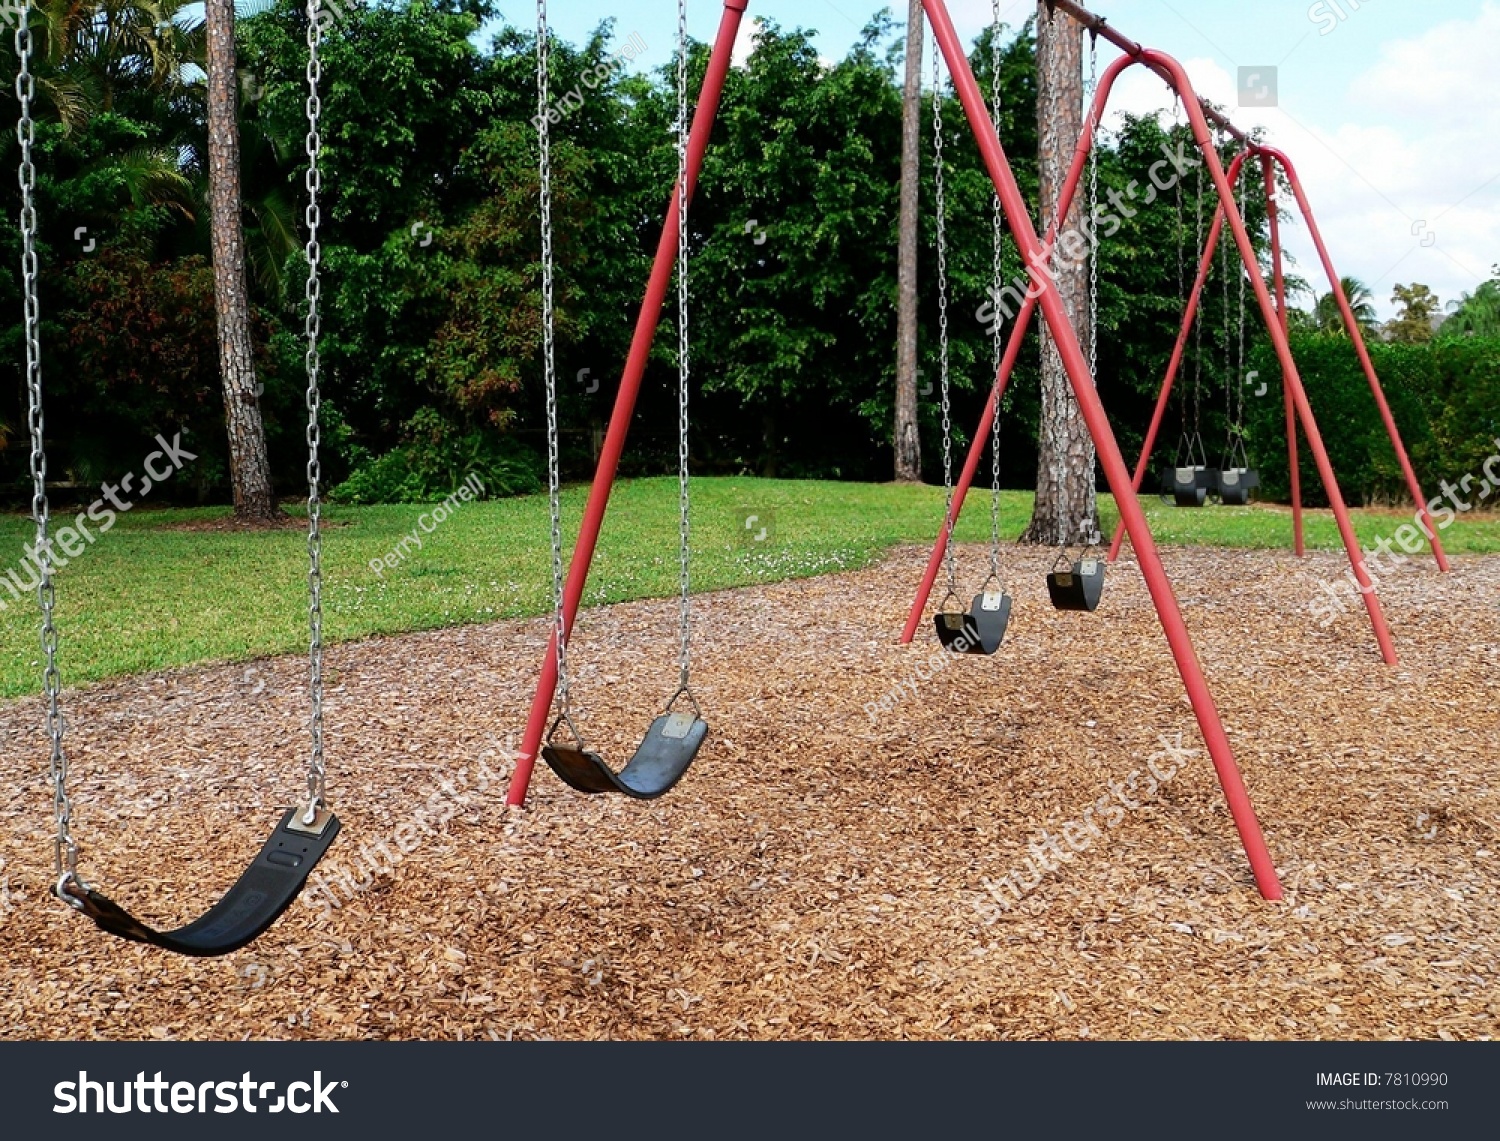 Empty Swing Set On Playground There Are Six Swings On A Red Swing Set